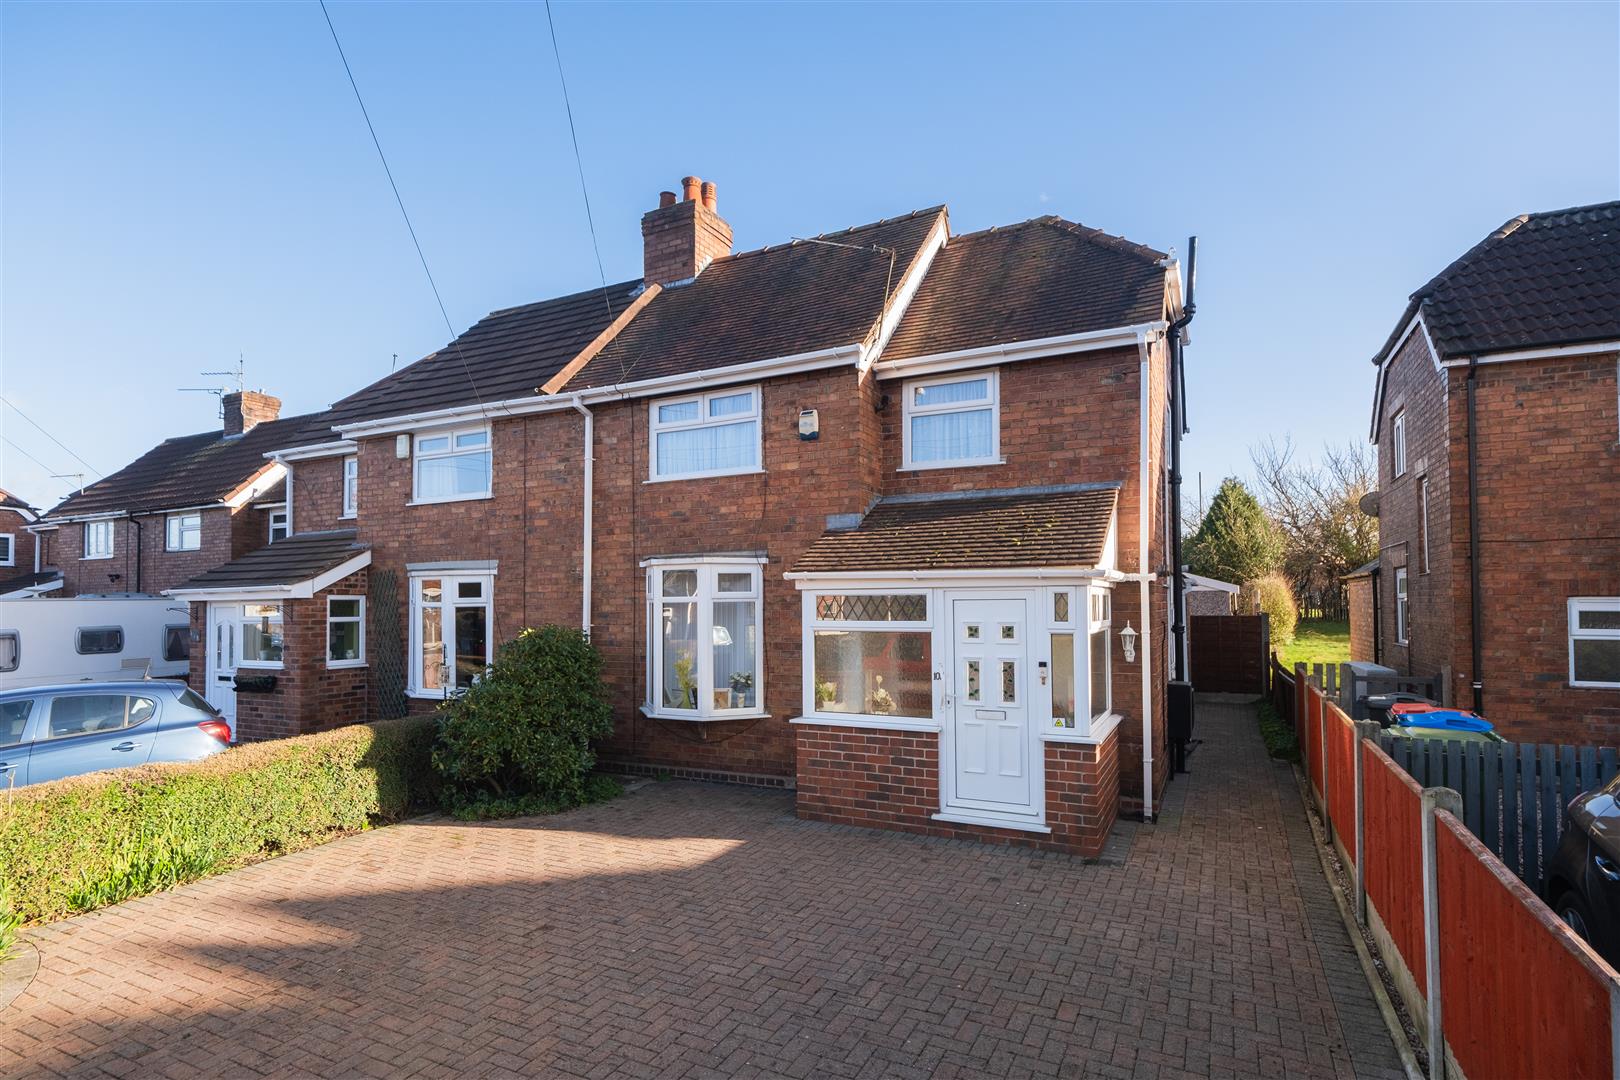 2 bedroom  Semi Detached House for Sale in Northwich